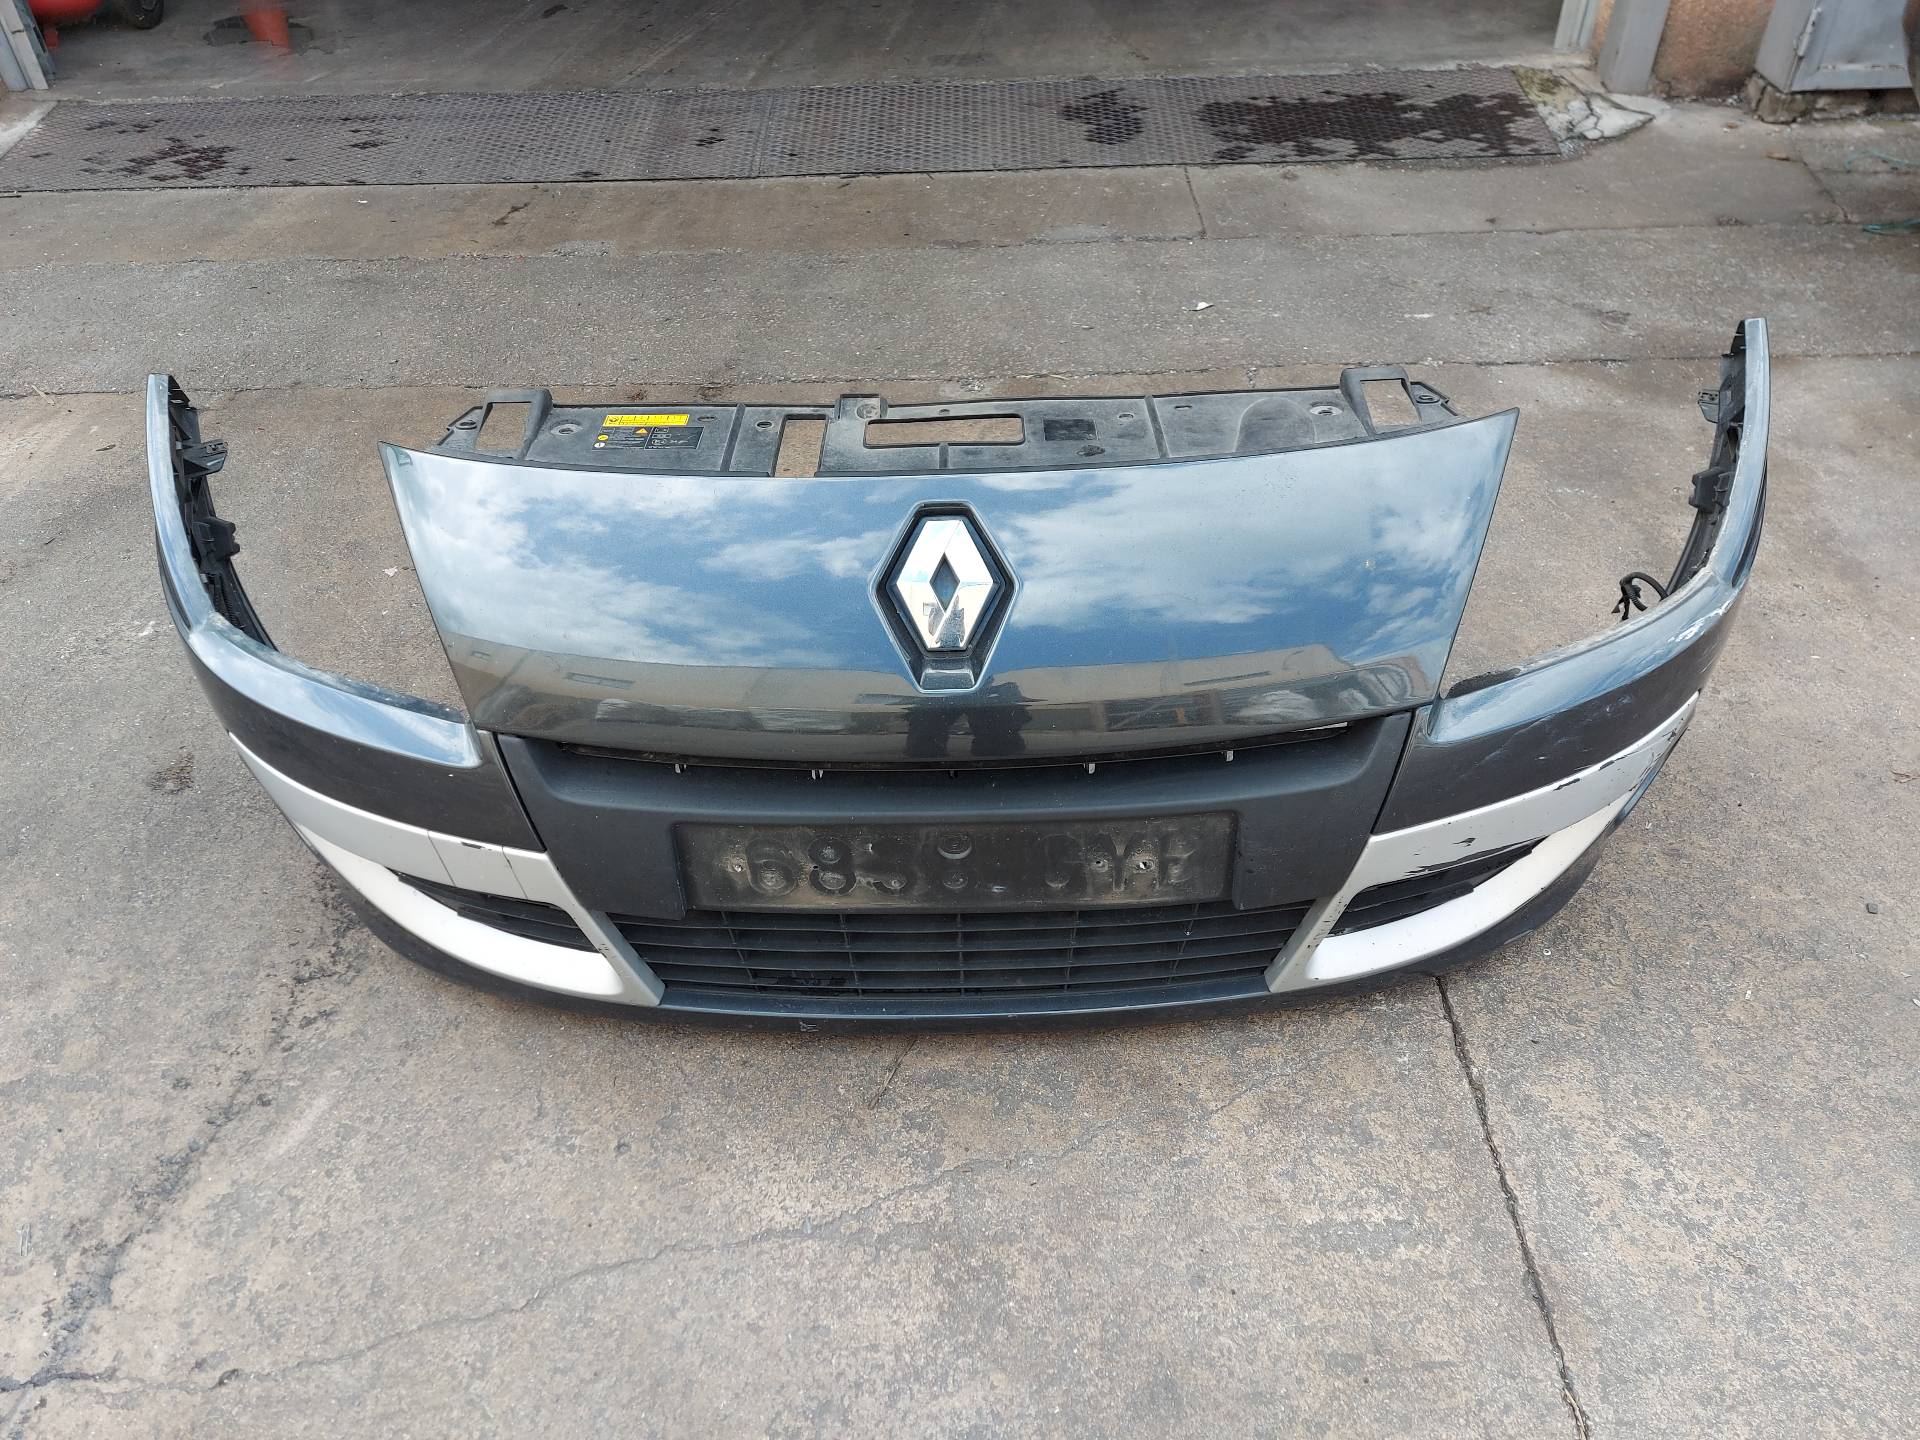 BMW Scenic 3 generation (2009-2015) Front Bumper 25351601